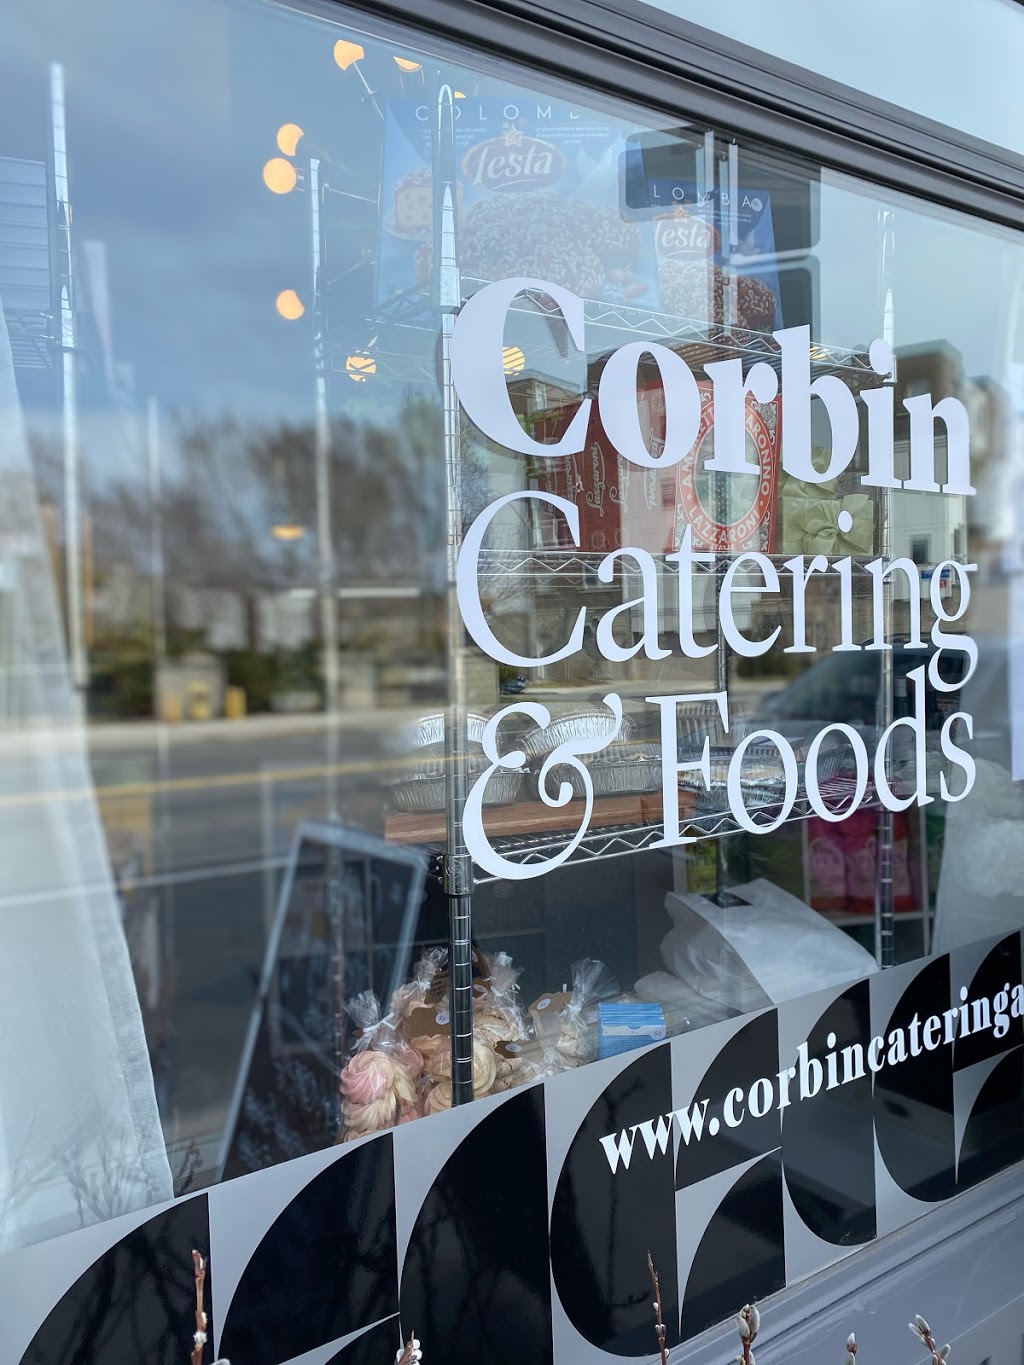 Corbin Catering and Foods | 1559 Kingston Rd, Scarborough, ON M1N 1R9, Canada | Phone: (647) 588-1116